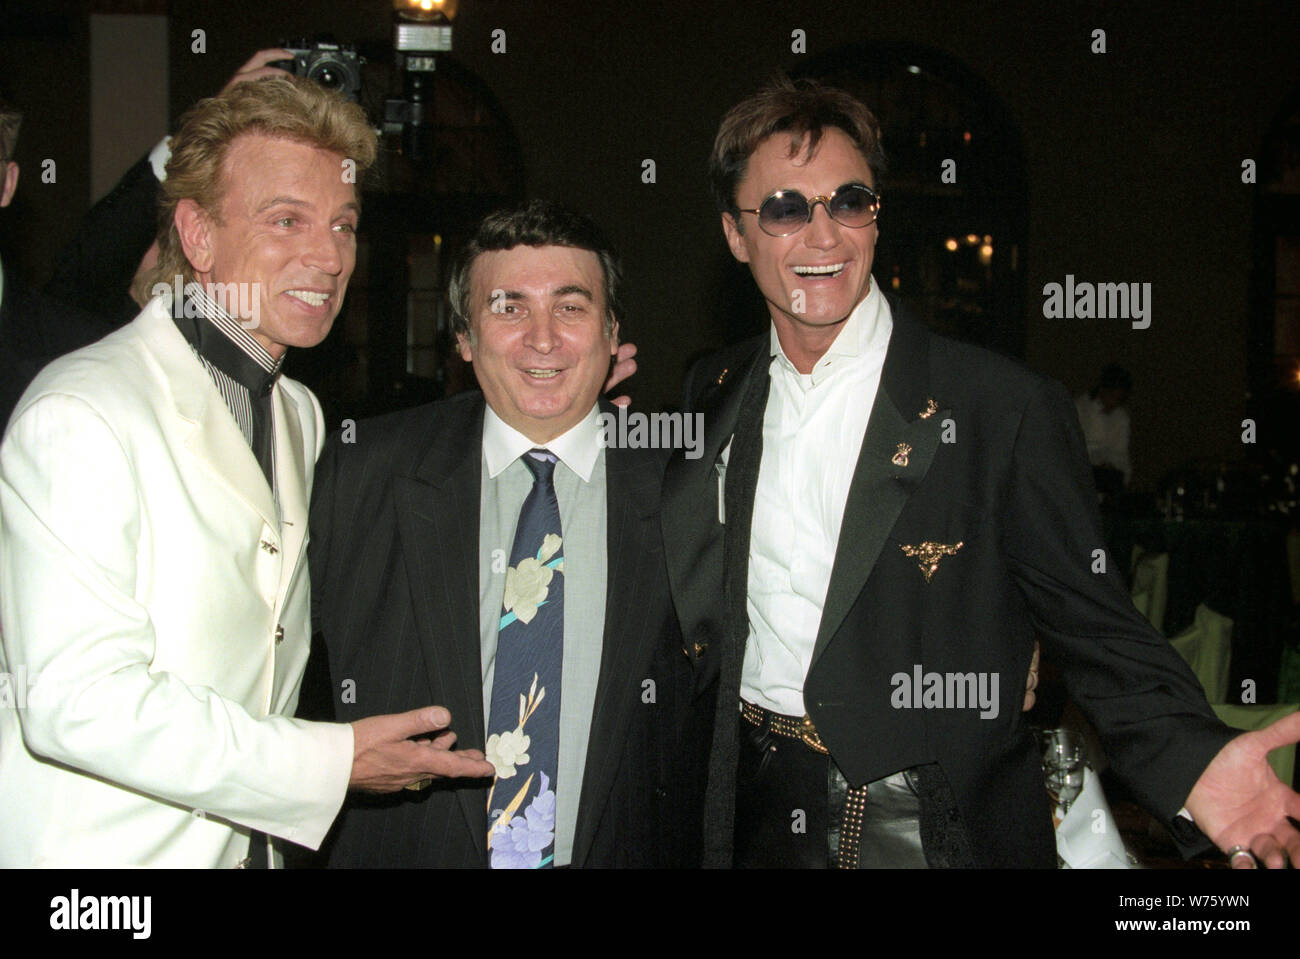 Siegfried (l) and Roy (r) celebrate Roy's birthday on 02.10.1995 at the Prinzregententheater in Munich with concert promoter Marcel Avram (M). Roy Horn was born on 3 October 1944 in Nordenham as Uwe Ludwig Horn. | usage worldwide Stock Photo